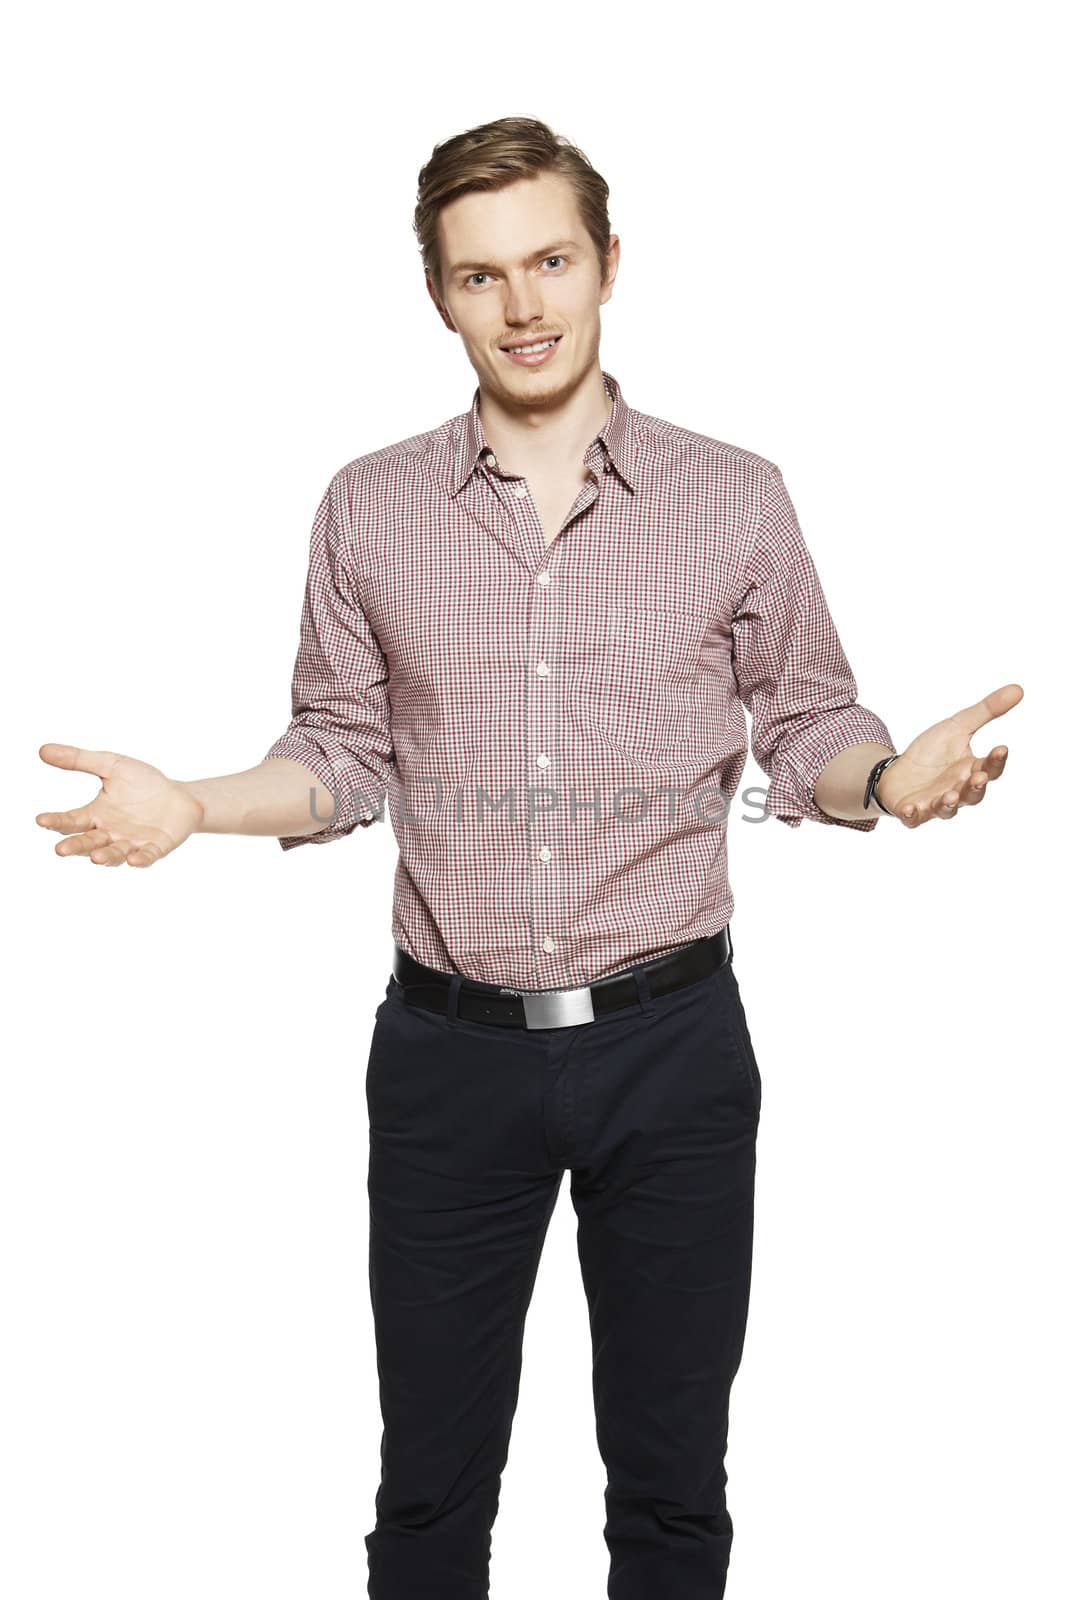 Young man throws up his hands. Studio shot of young man against a white background.